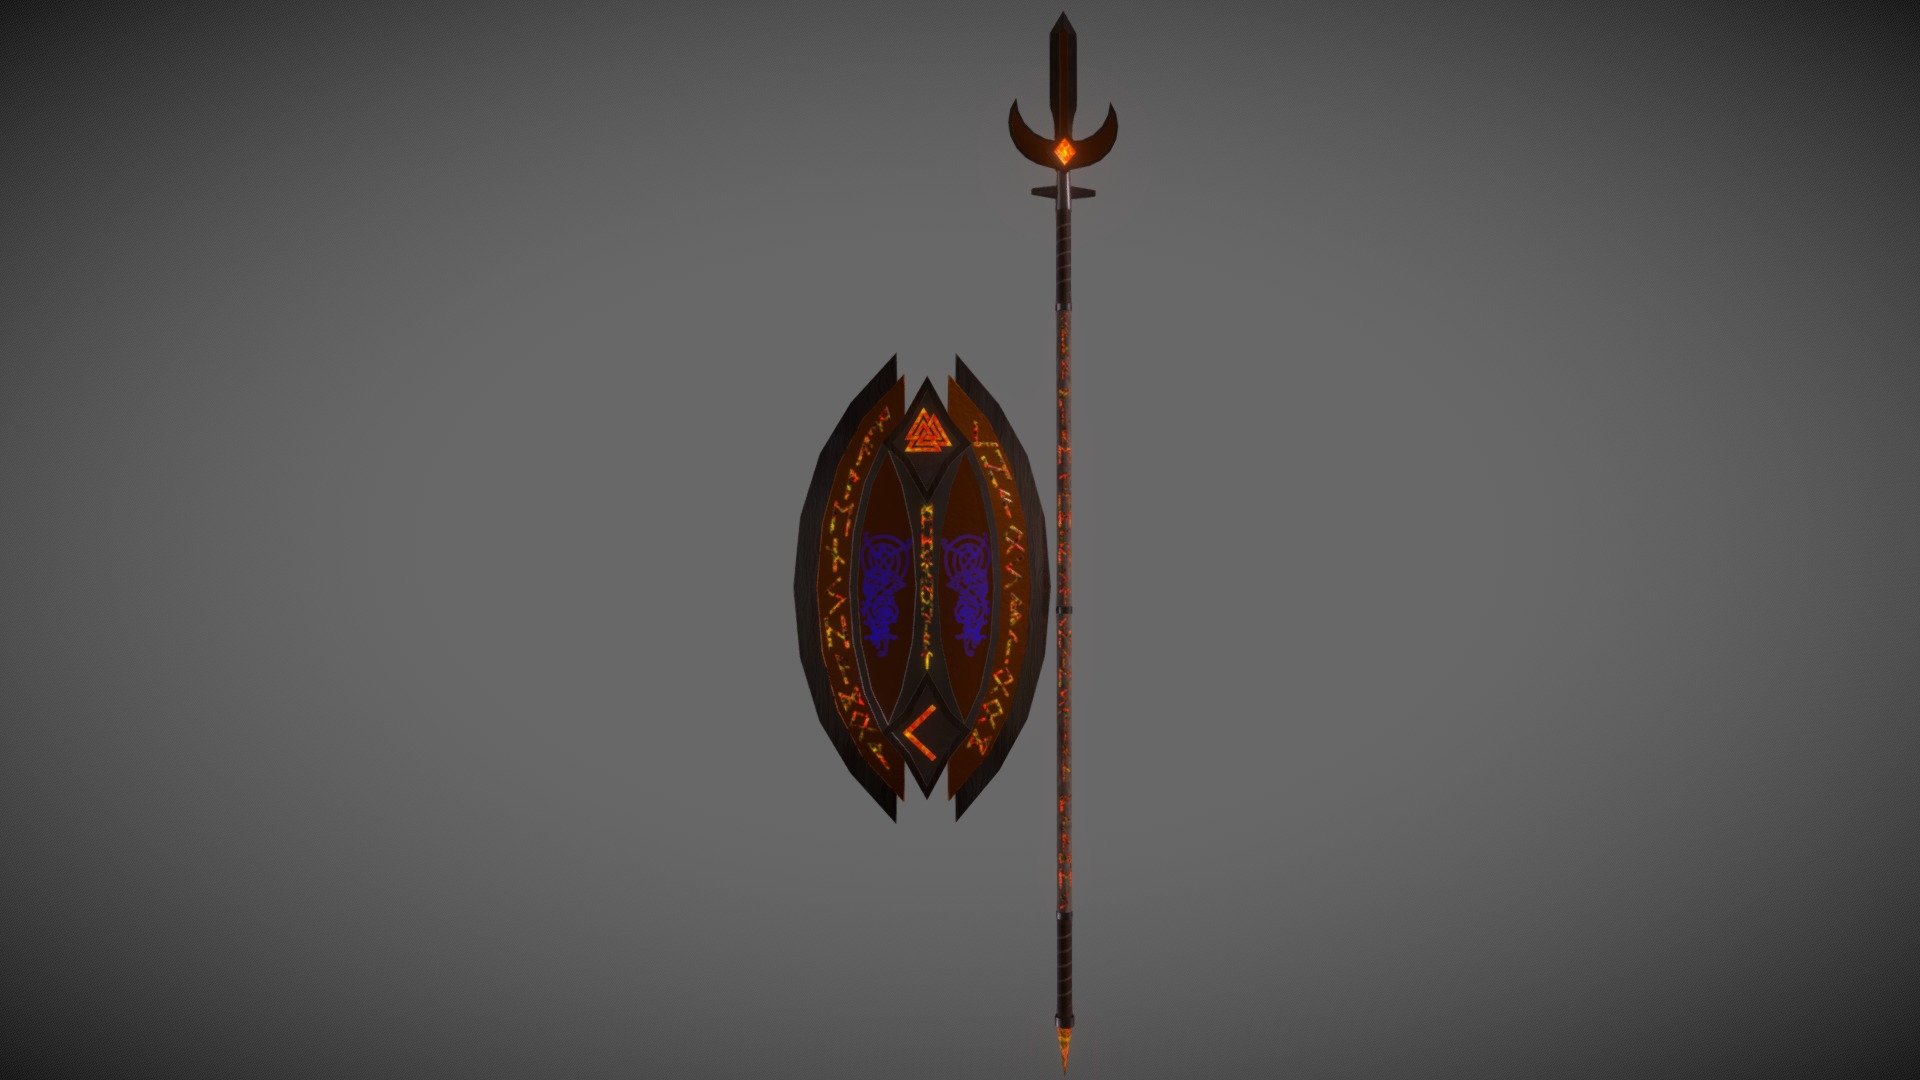 Spear and Shield Forged by the dwarves for the valkyrie and warrior queen of the north, Kara, the daughter of fire. The runic inscription on the spear read &ldquo;Kara, Fire Tempest, Celestial Flames